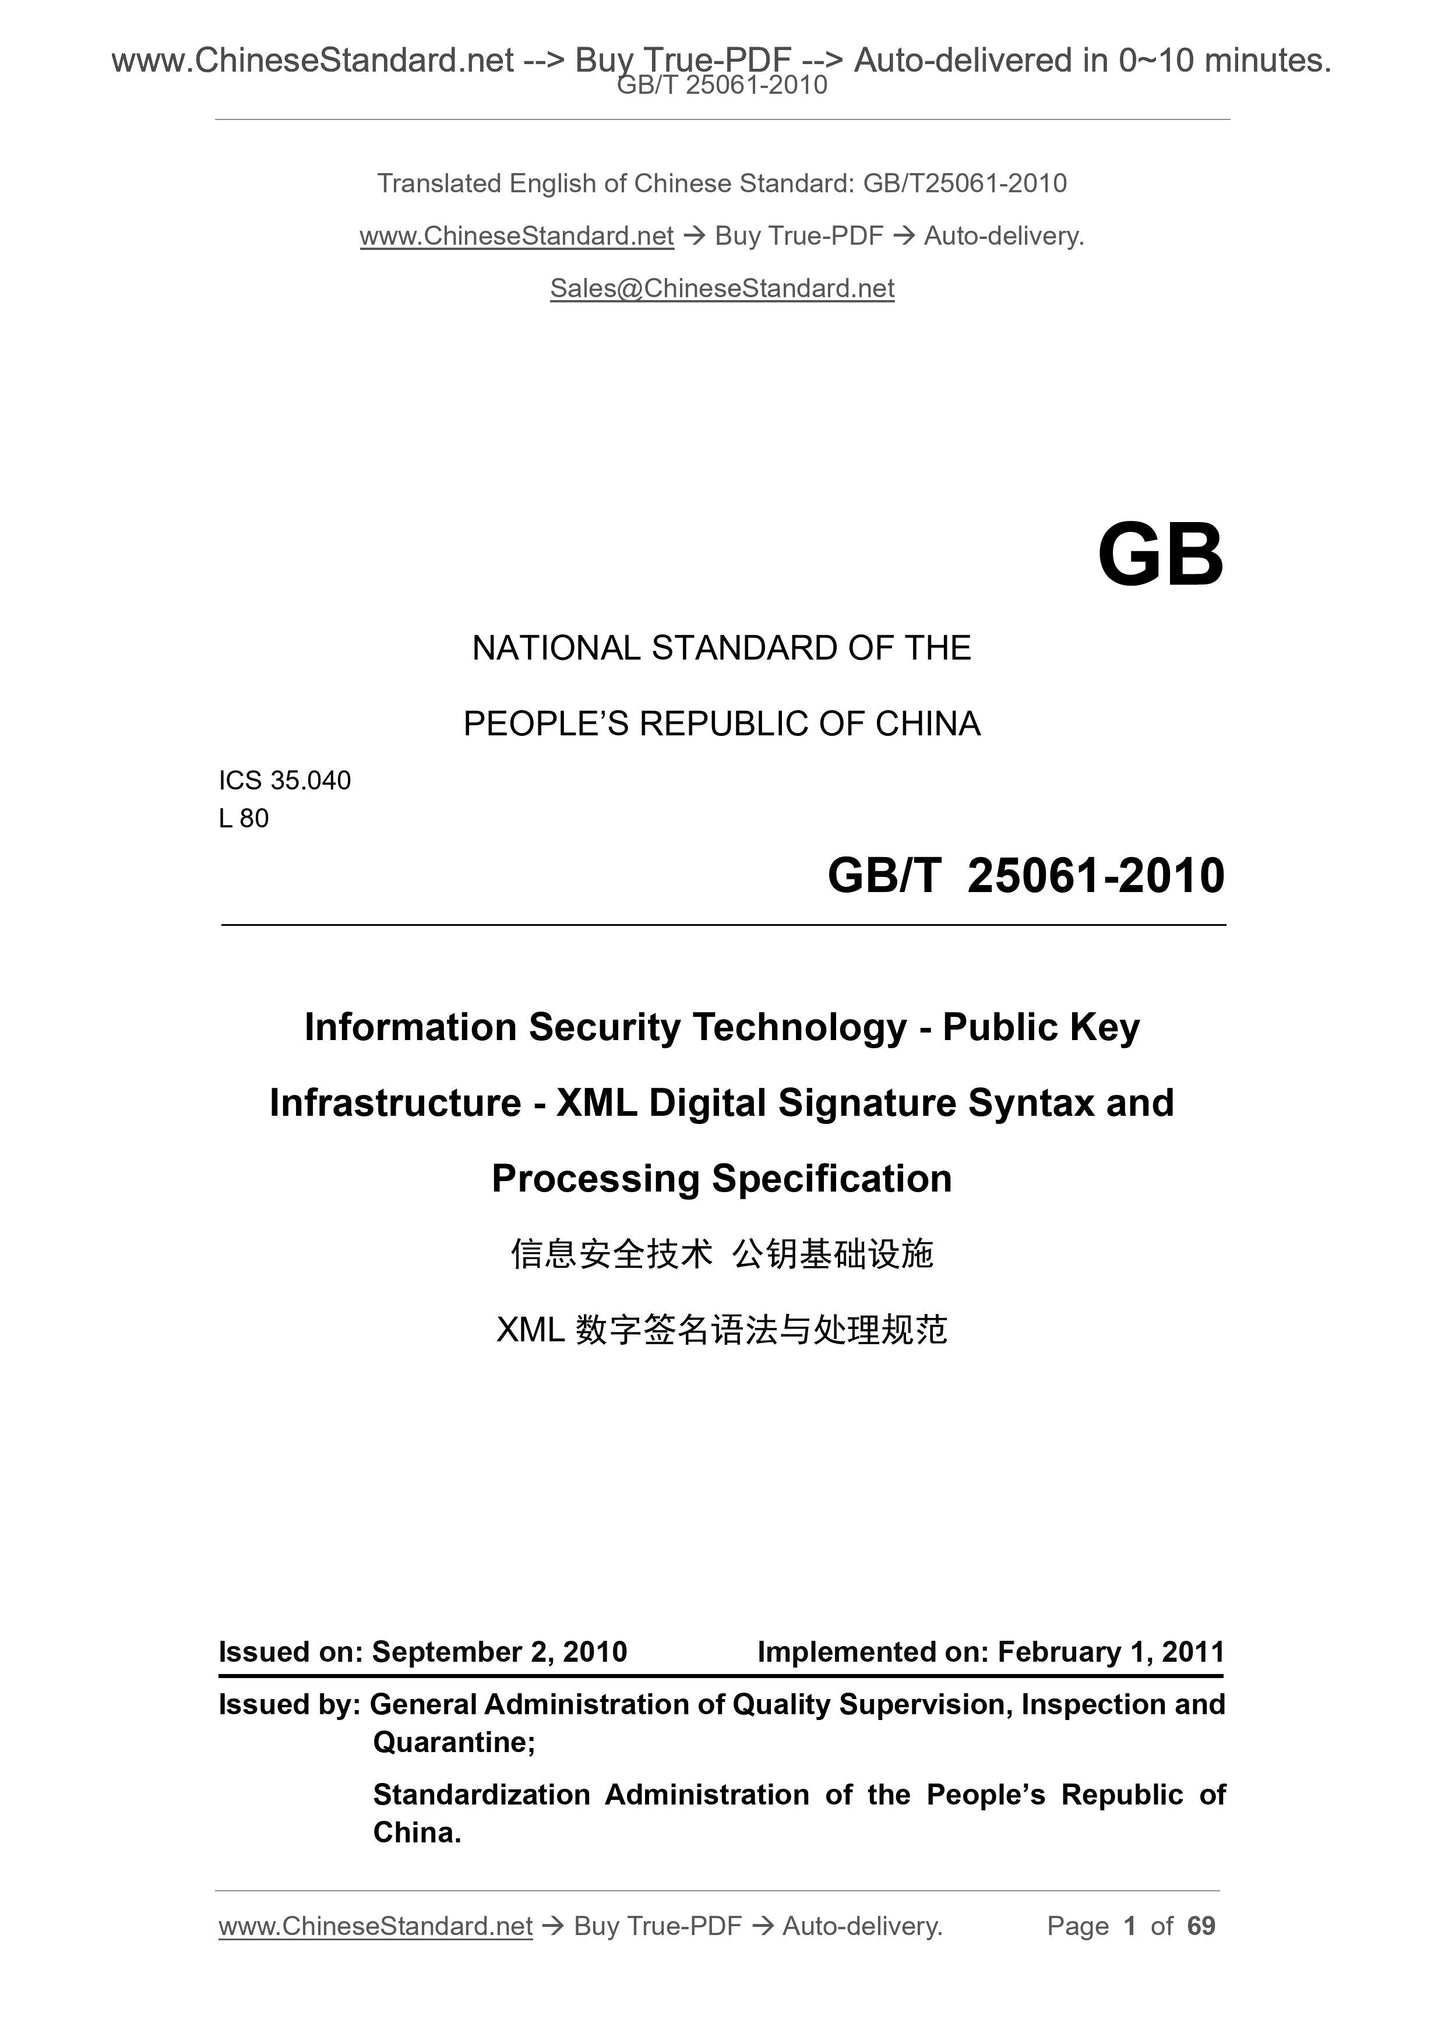 GB/T 25061-2010 Page 1